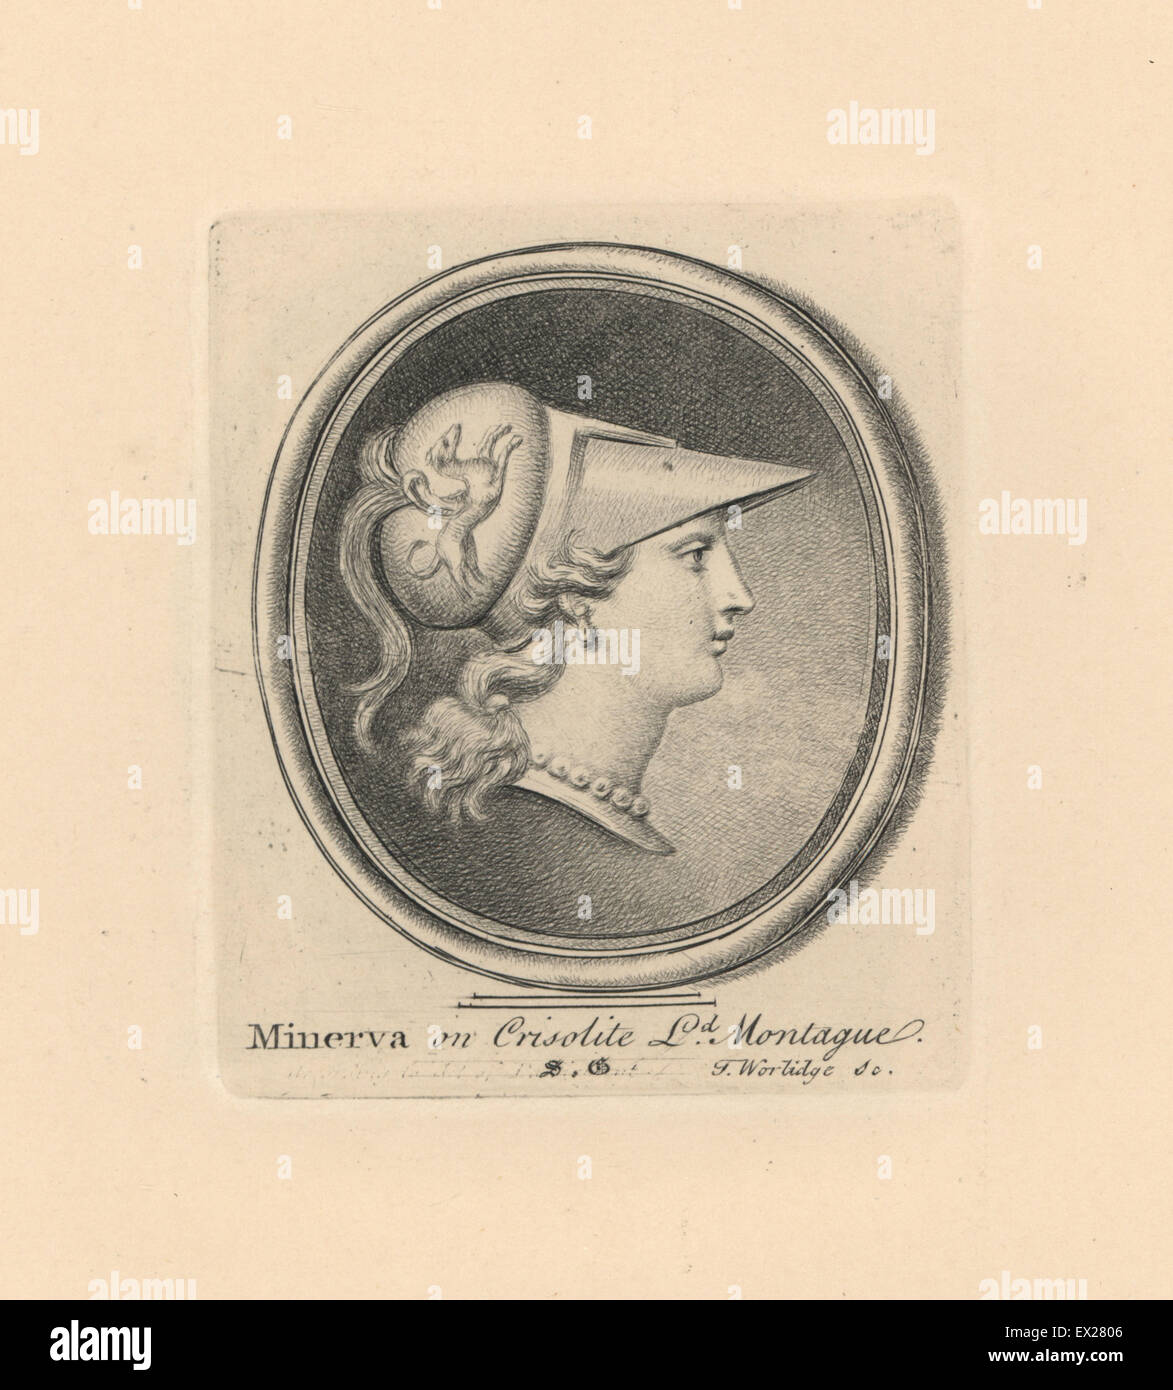 Portrait of Minerva, Roman goddess of wisdom, in helmet with plume, earring and necklace. On chrysolite from Lord Montague's collection. Copperplate engraving by Thomas Worlidge from James Vallentin's One Hundred and Eight Engravings from Antique Gems, 1863. Stock Photo